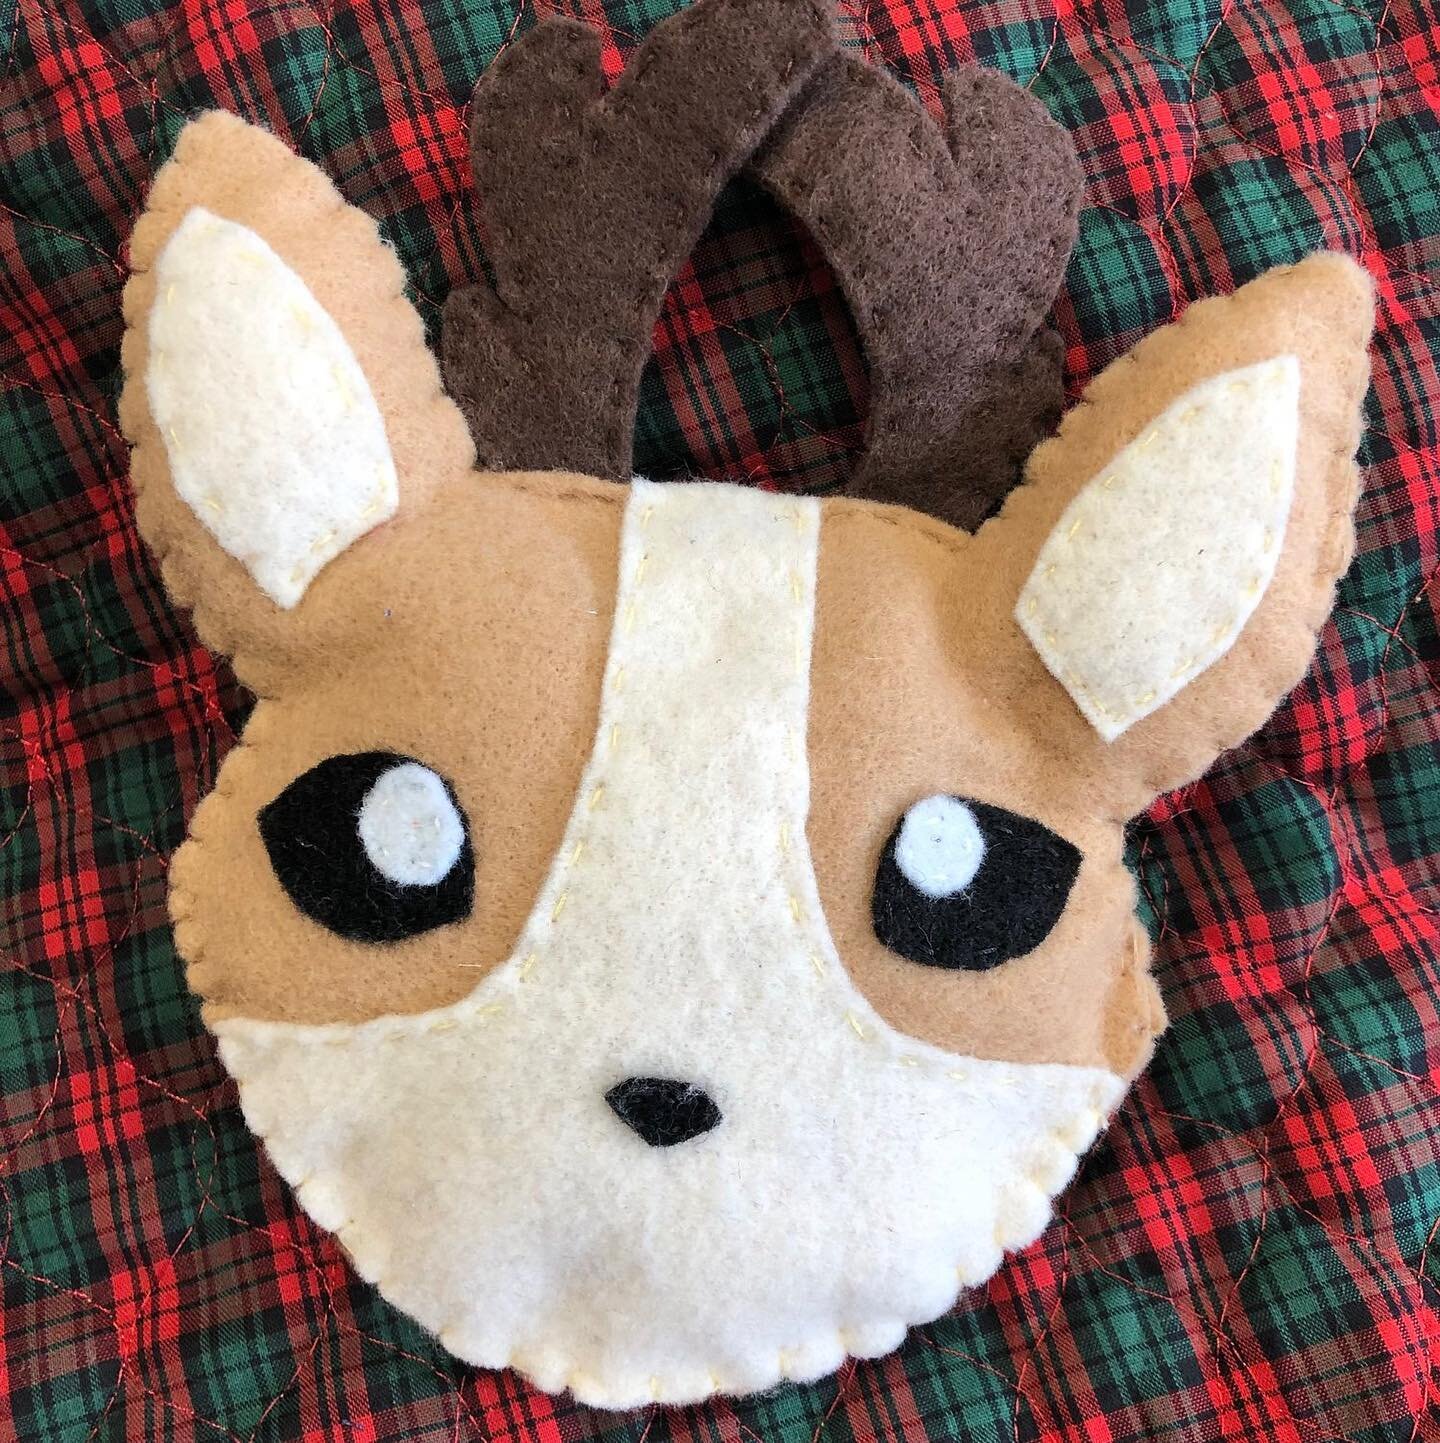 Hand Sew Reindeer class this Sunday!
What a cute animal friend, perfect for Christmas!
Visit campfashionista.net for more info to sign up 

#feltanimals #feltreindeer #handsew